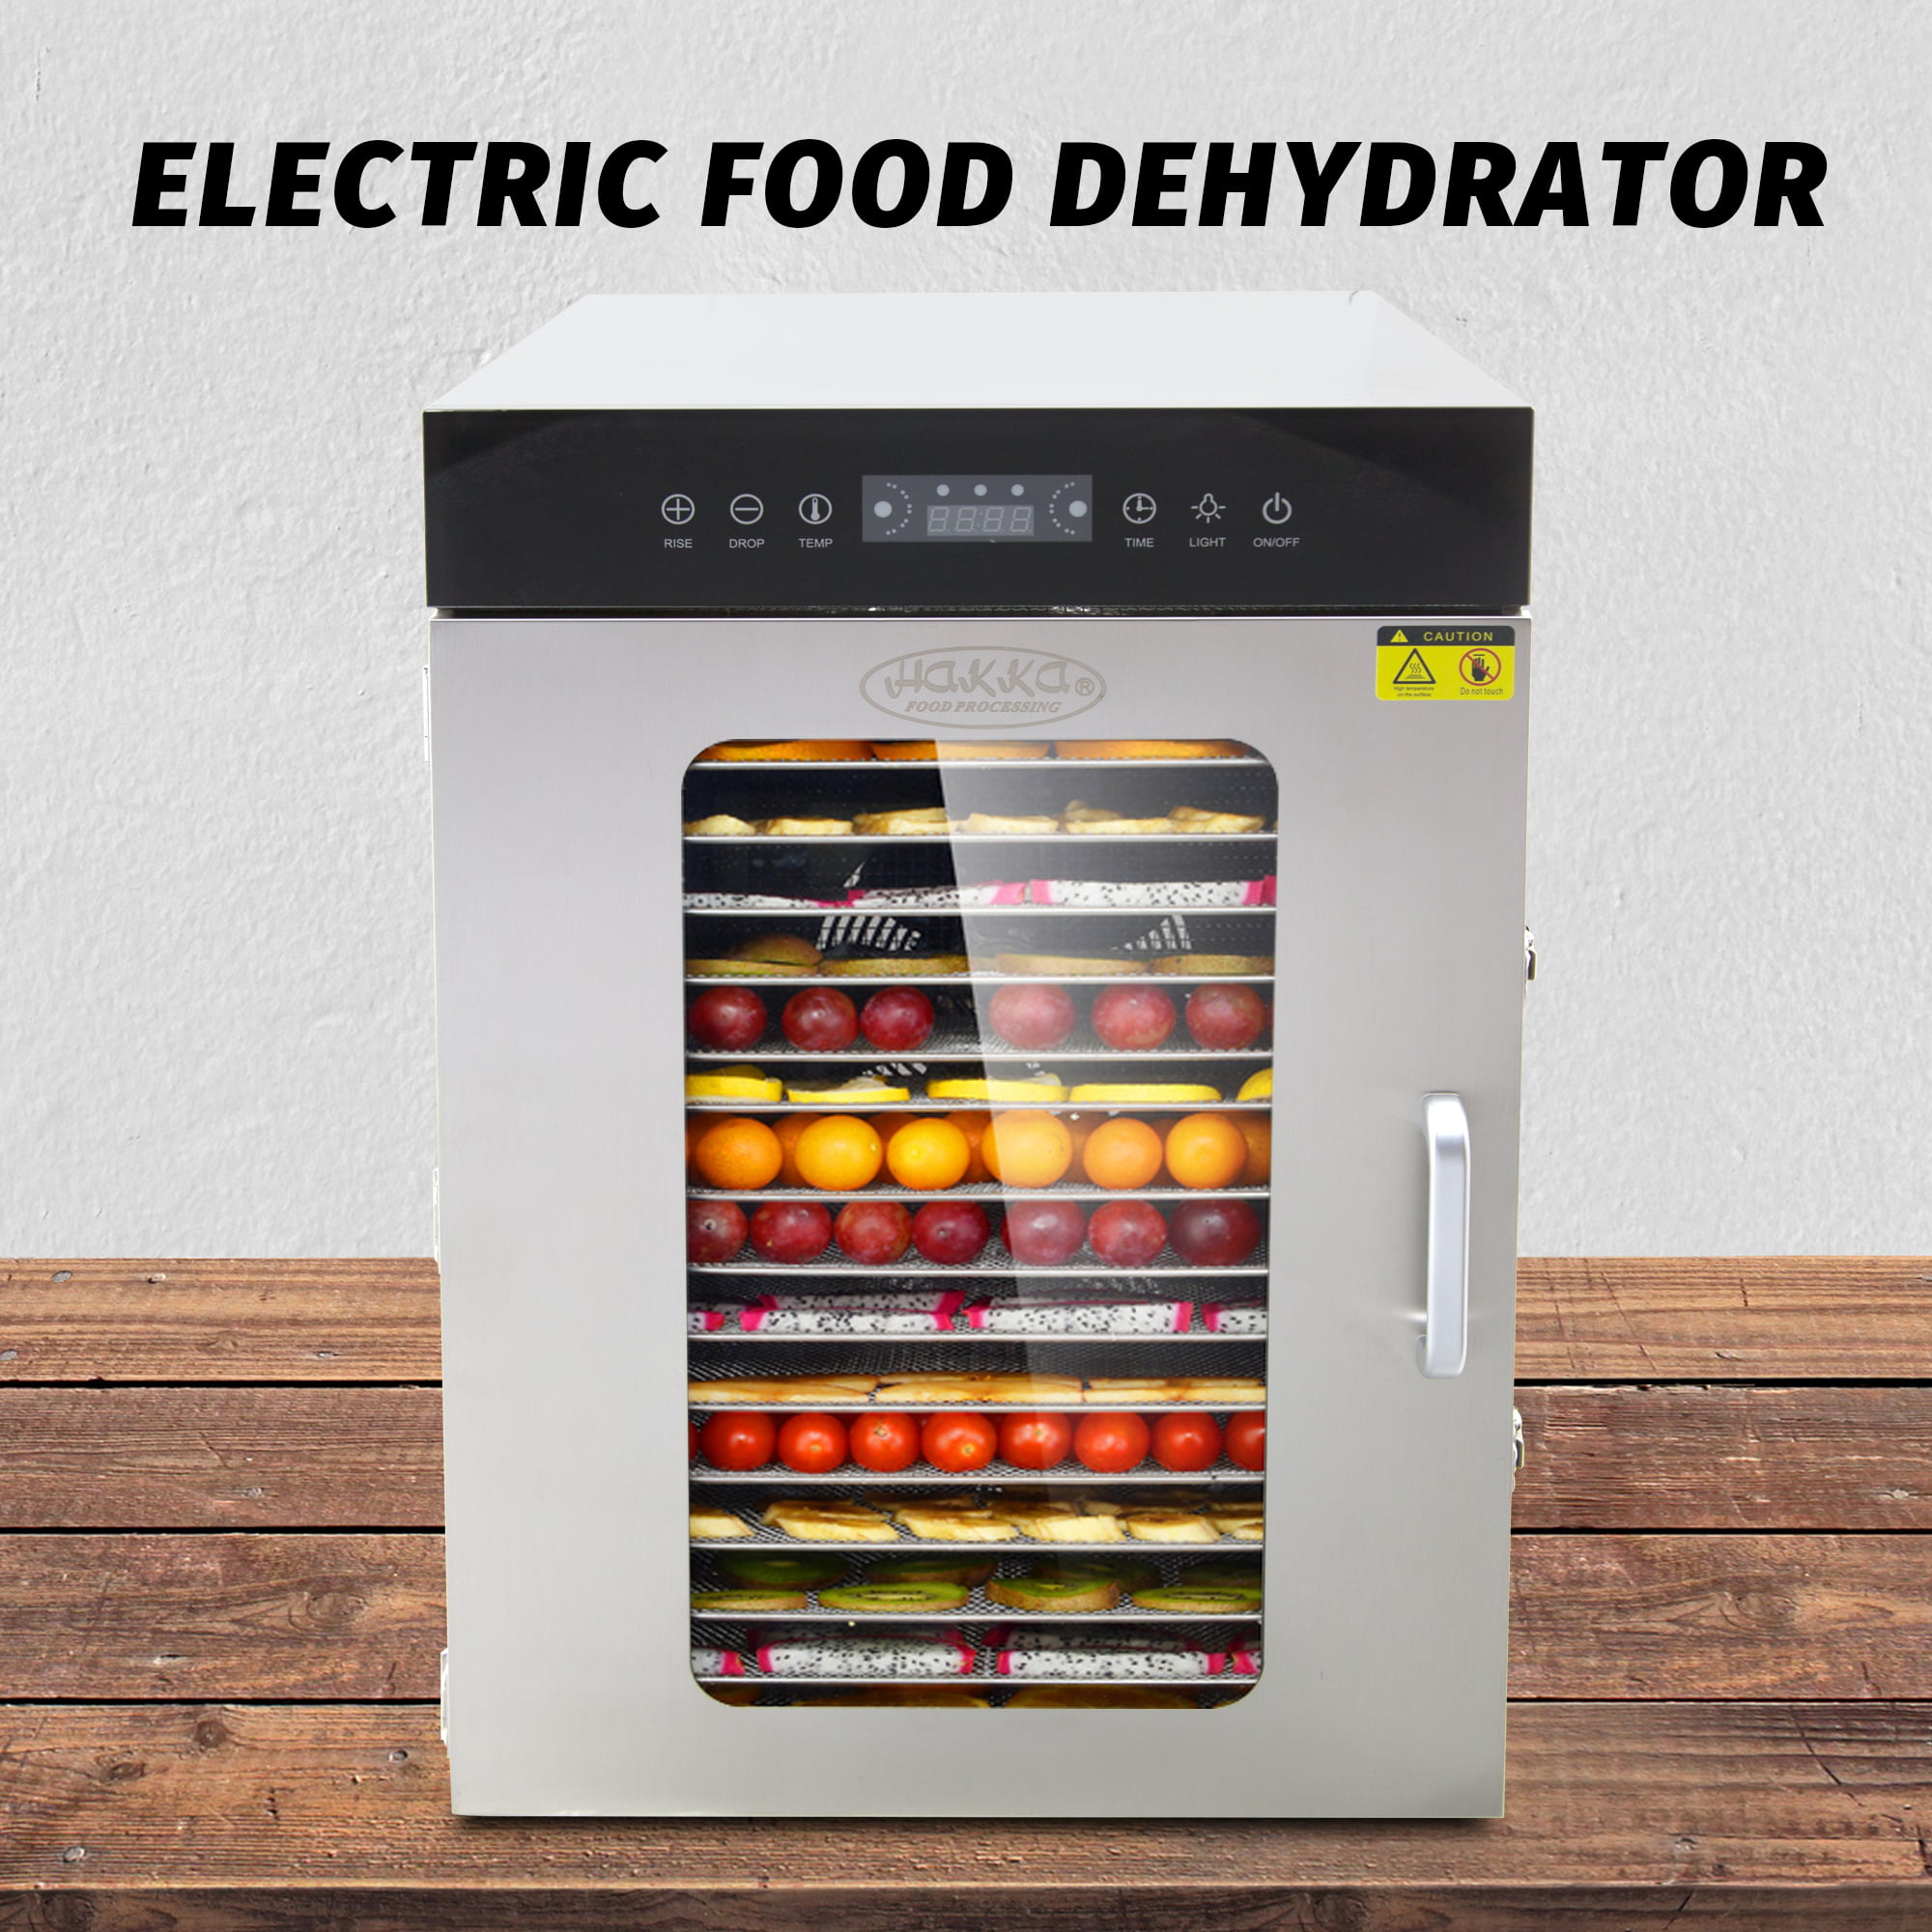 NJTFHU Large Commercial Food Dehydrator 16 Trays Food Dryer Stainless Steel  100-200F Temperature Control Adjustable 15 Hour Timer for Jerky, Herb